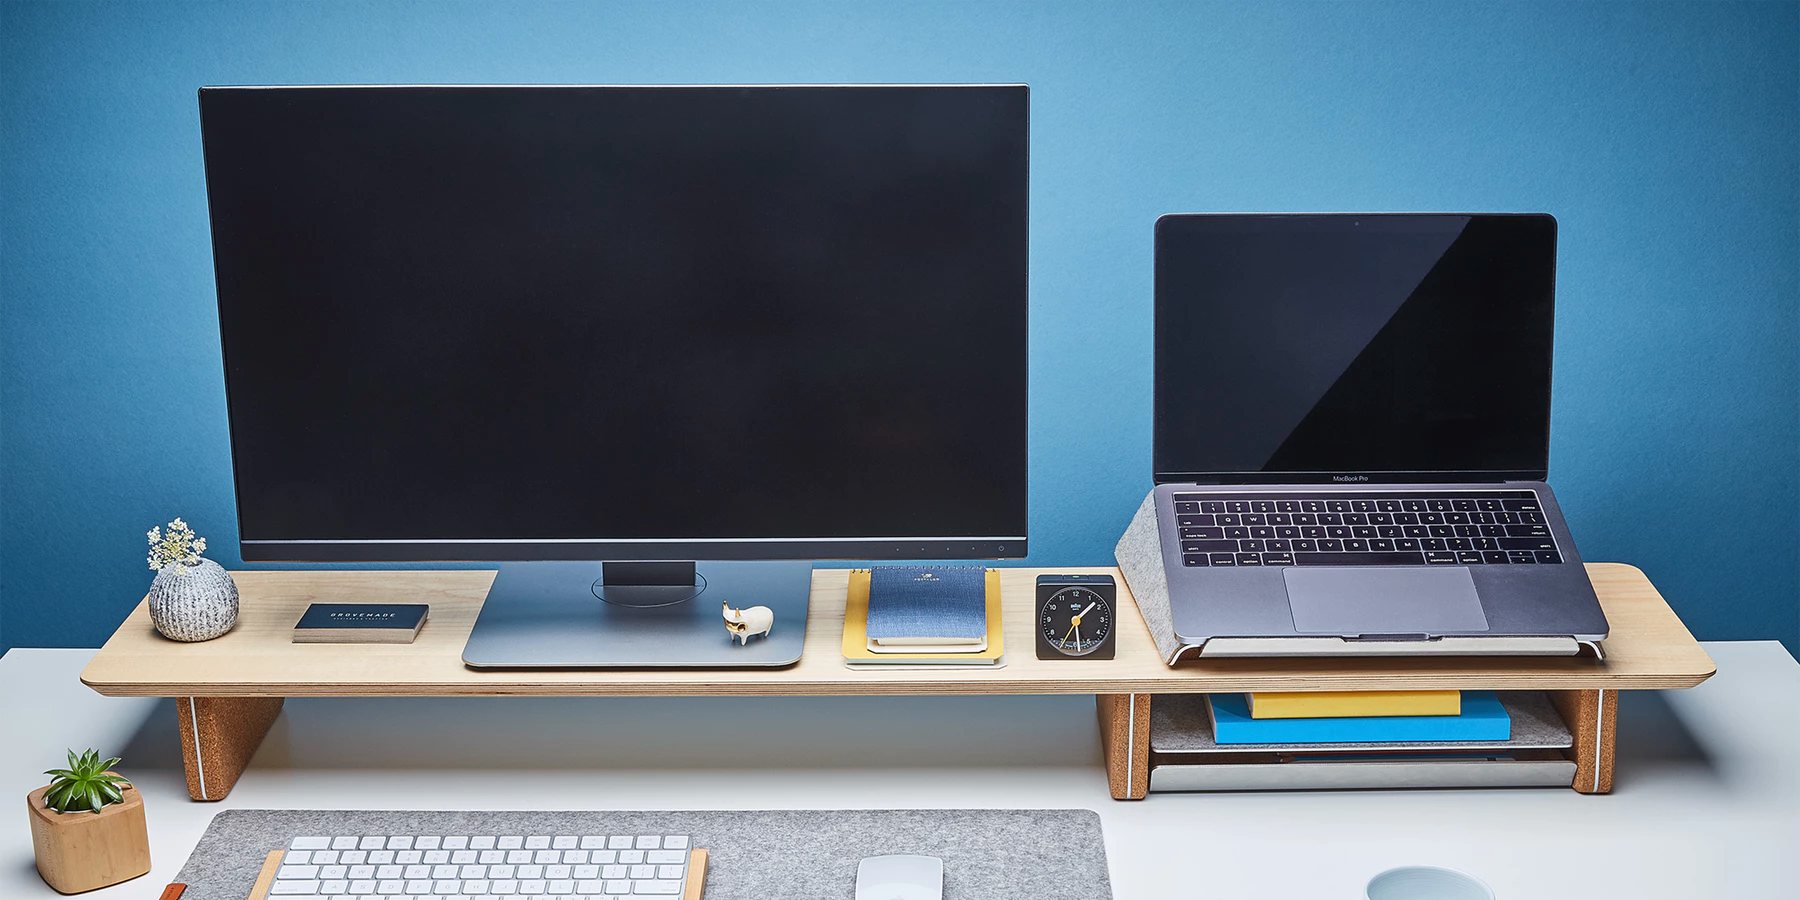 Grovemade's new Desk Shelf System brings organization to your